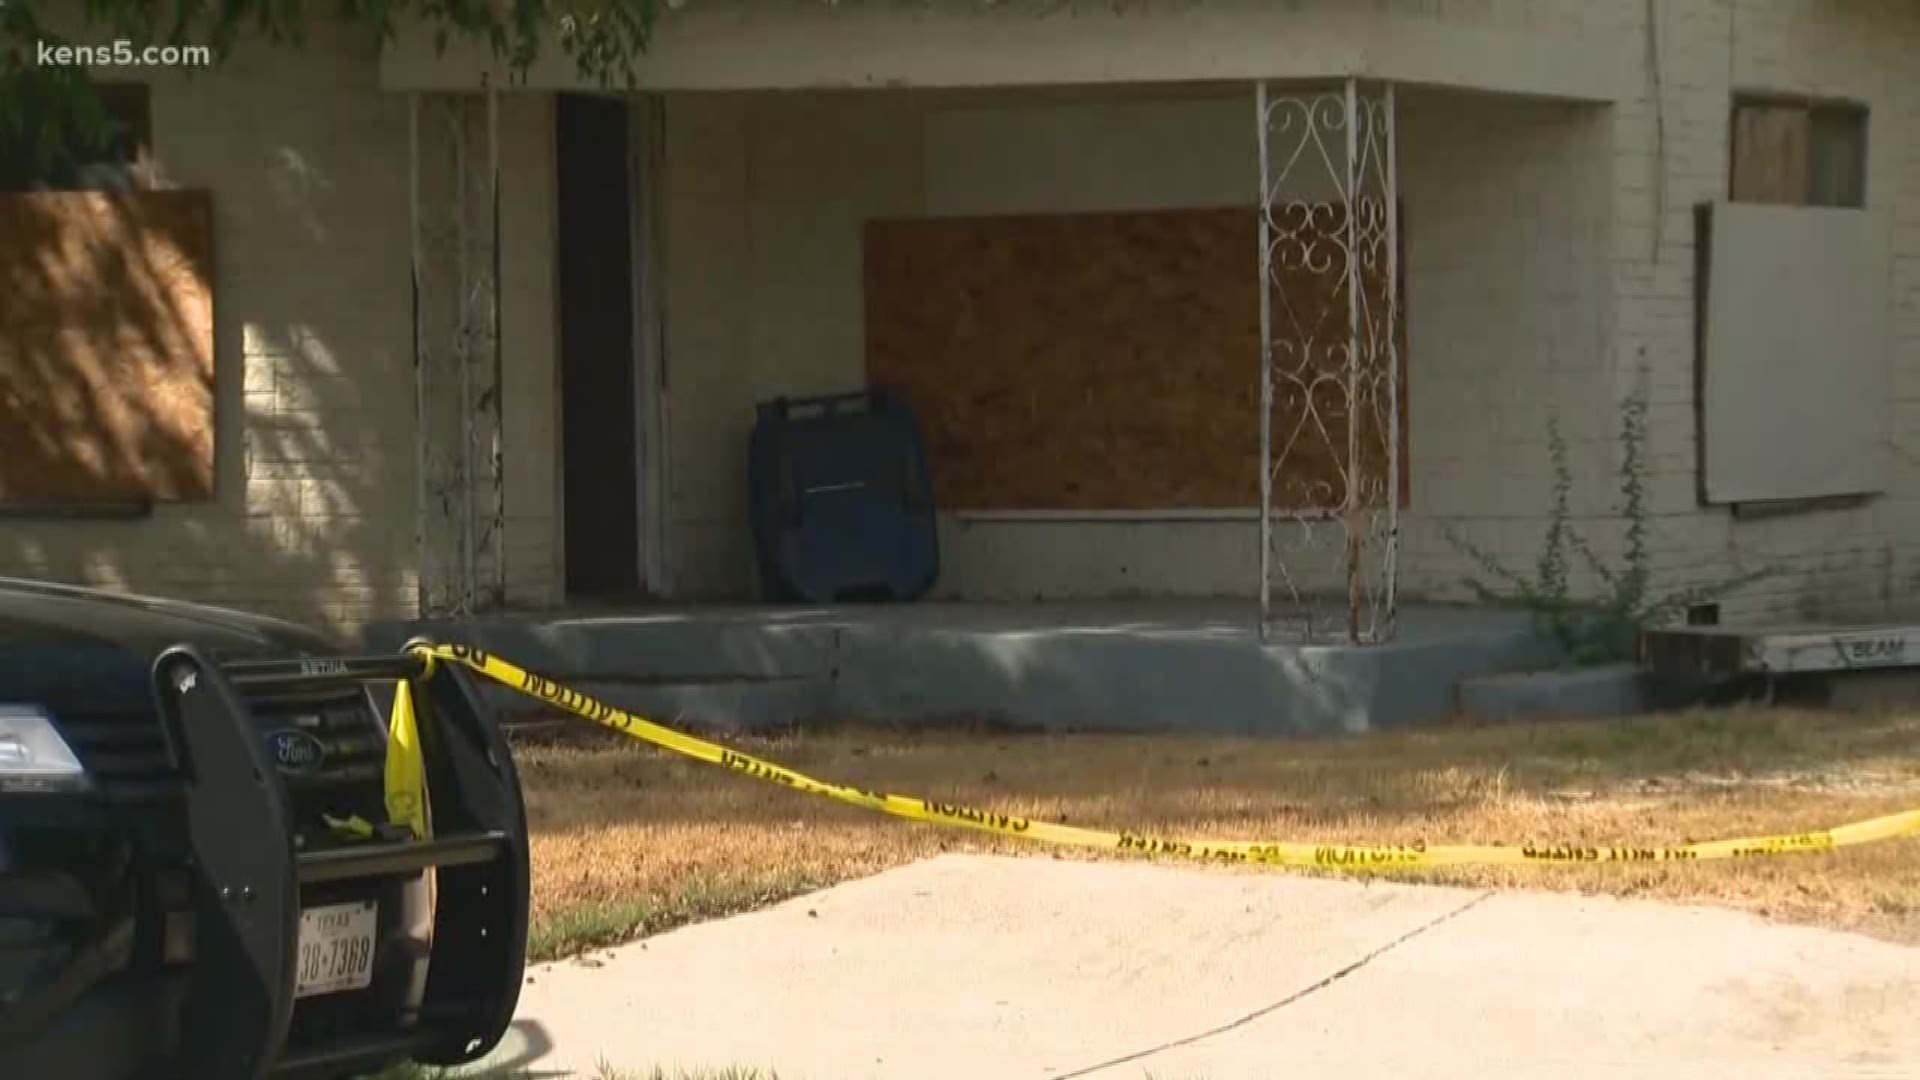 San Antonio police said the body had been there for a while, but there was no apparent trauma.